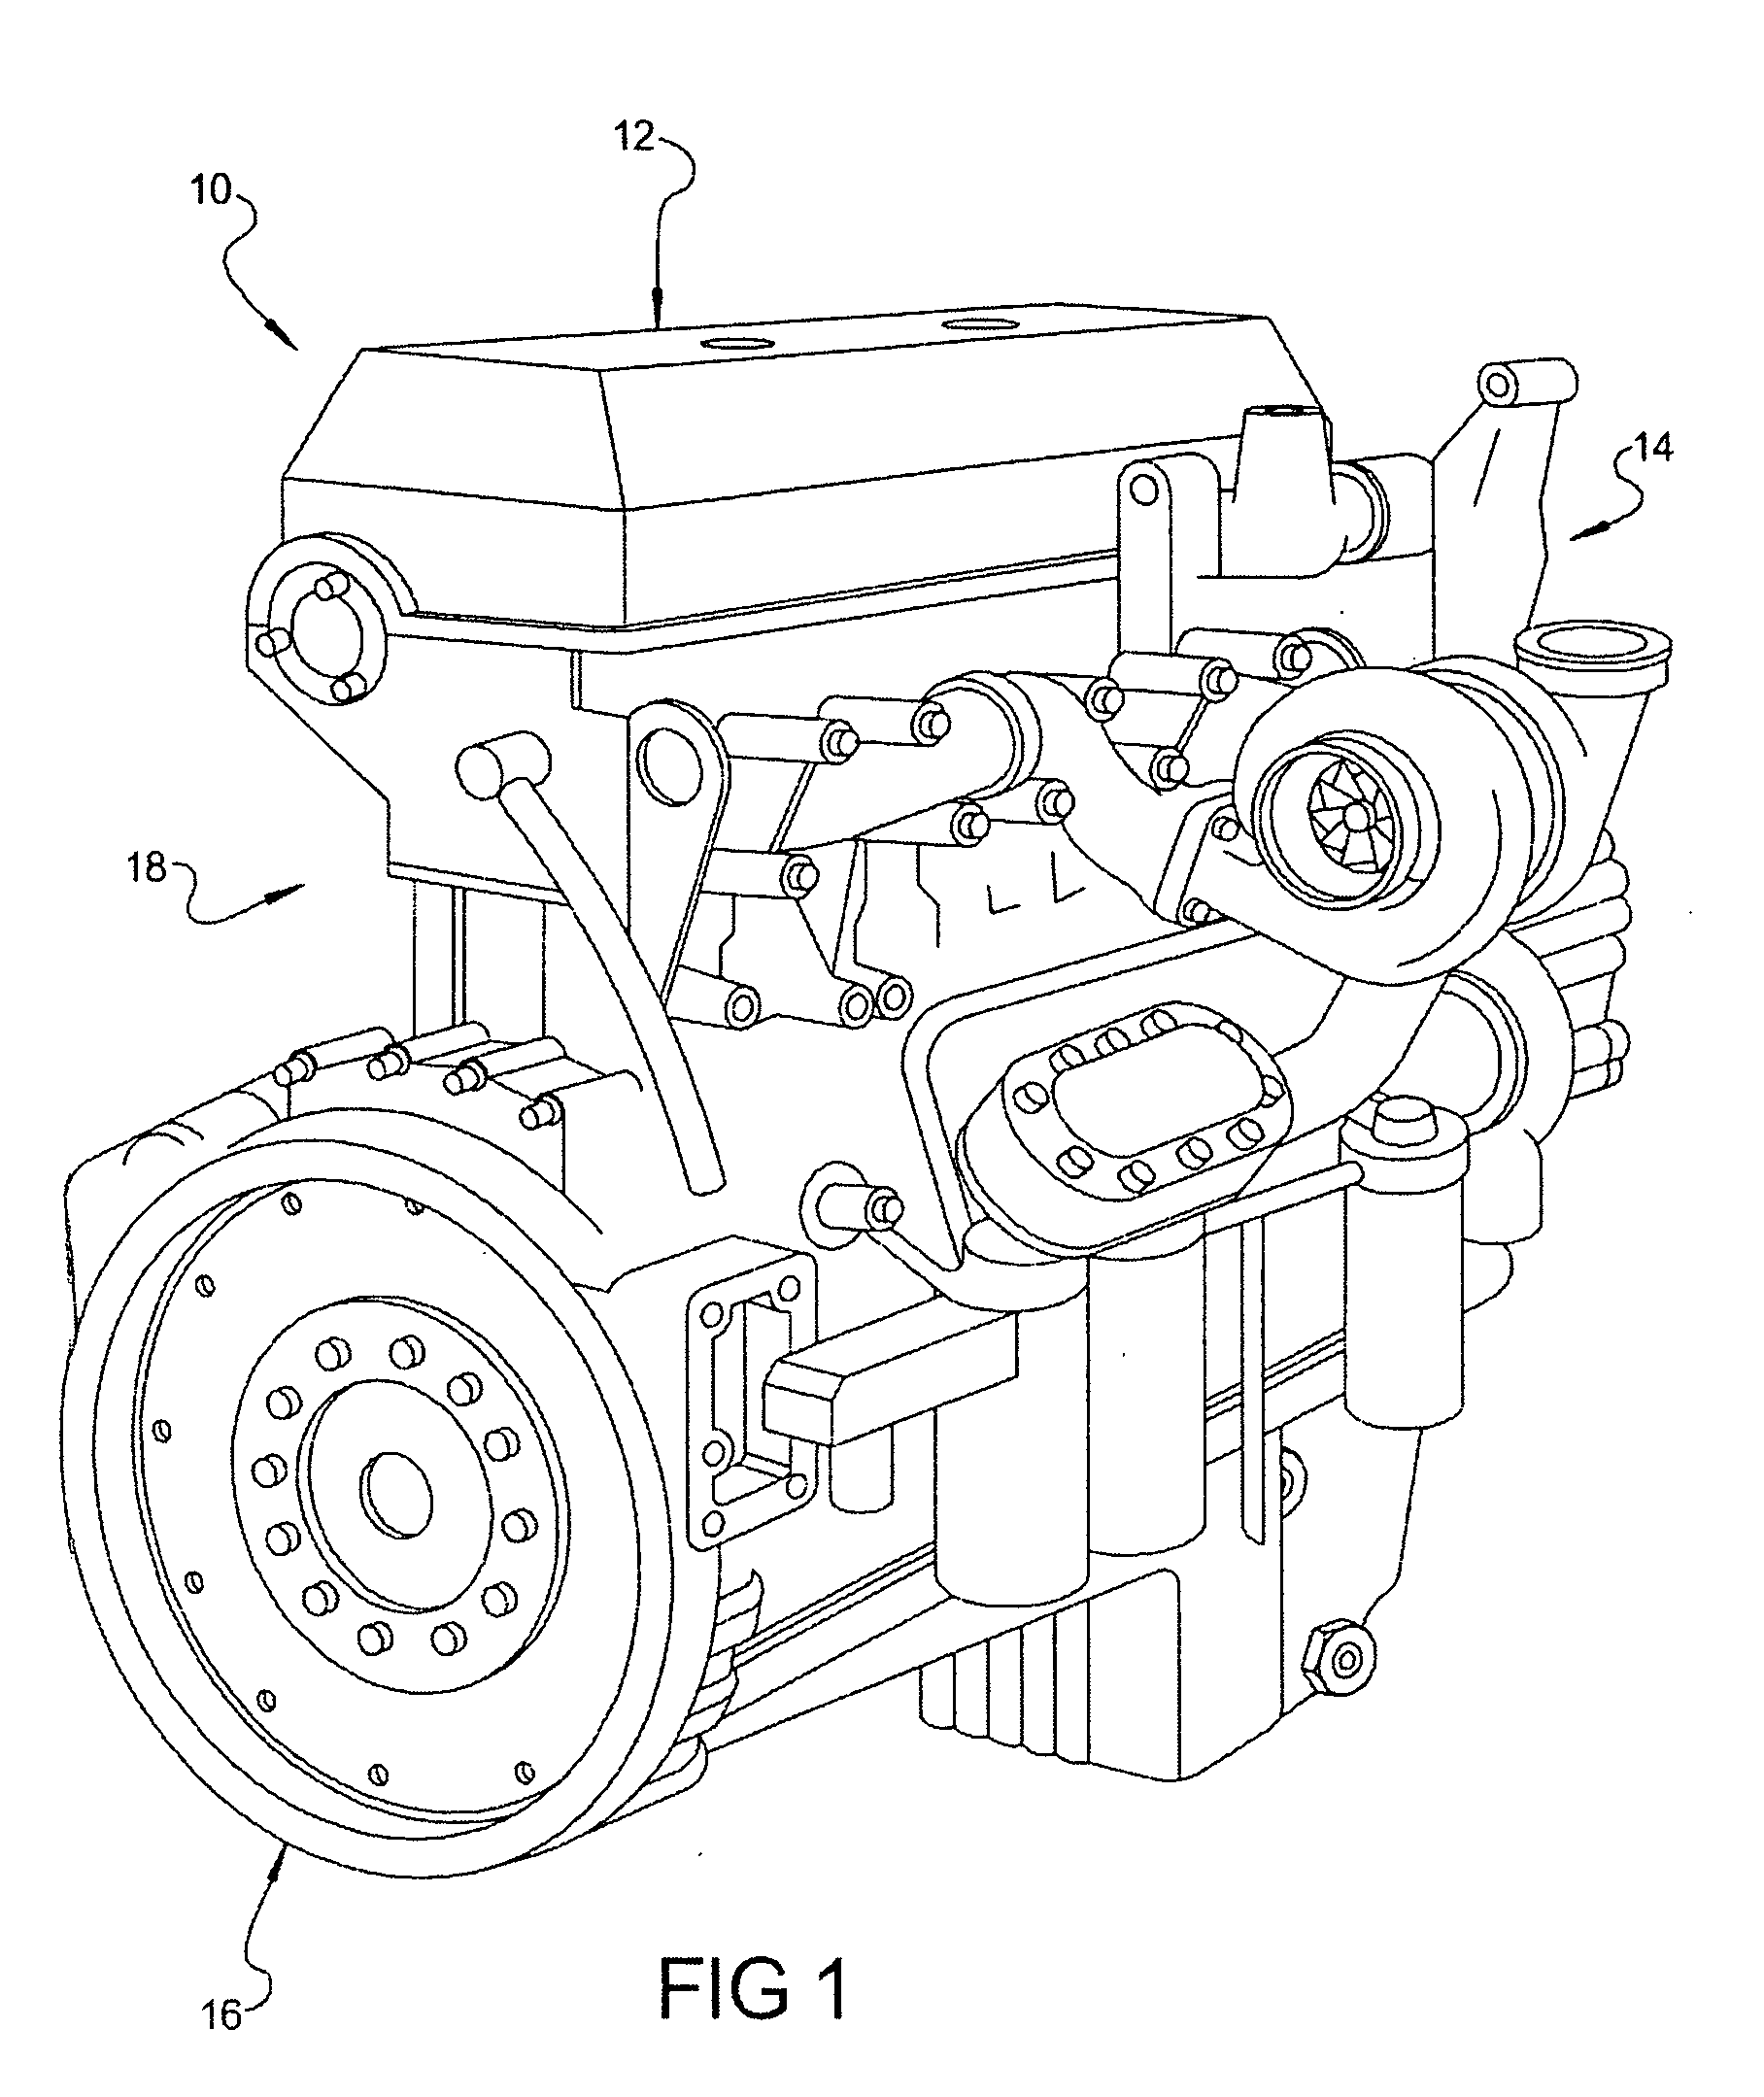 Method and system to control internal combustion engine idle shut down